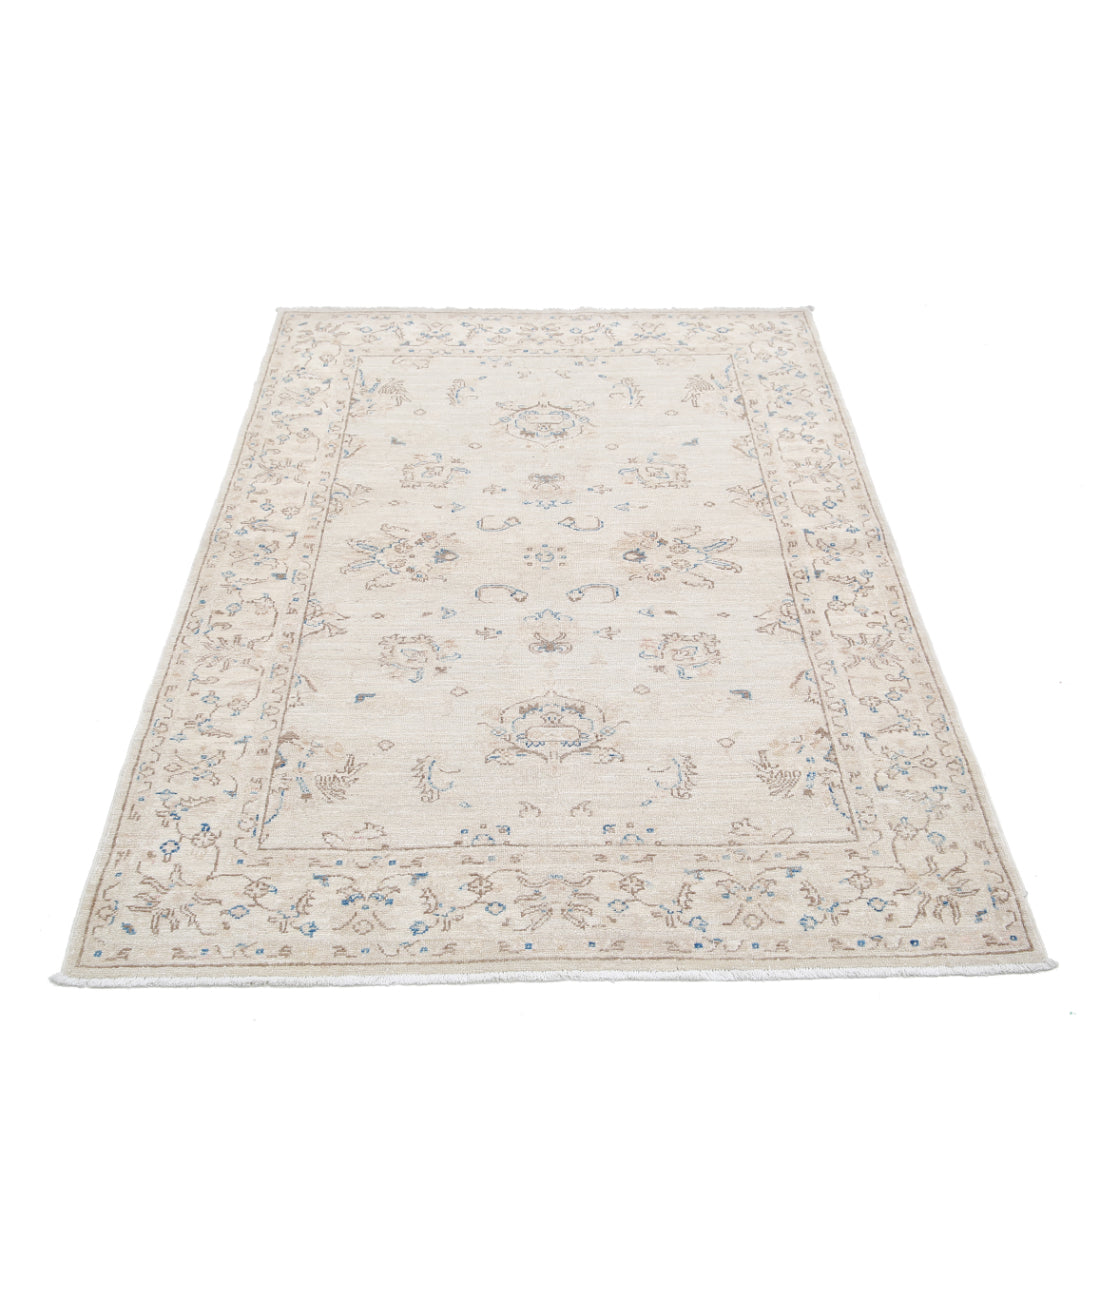 Hand Knotted Serenity Wool Rug - 3'10'' x 5'9'' 3'10'' x 5'9'' (115 X 173) / Grey / Ivory